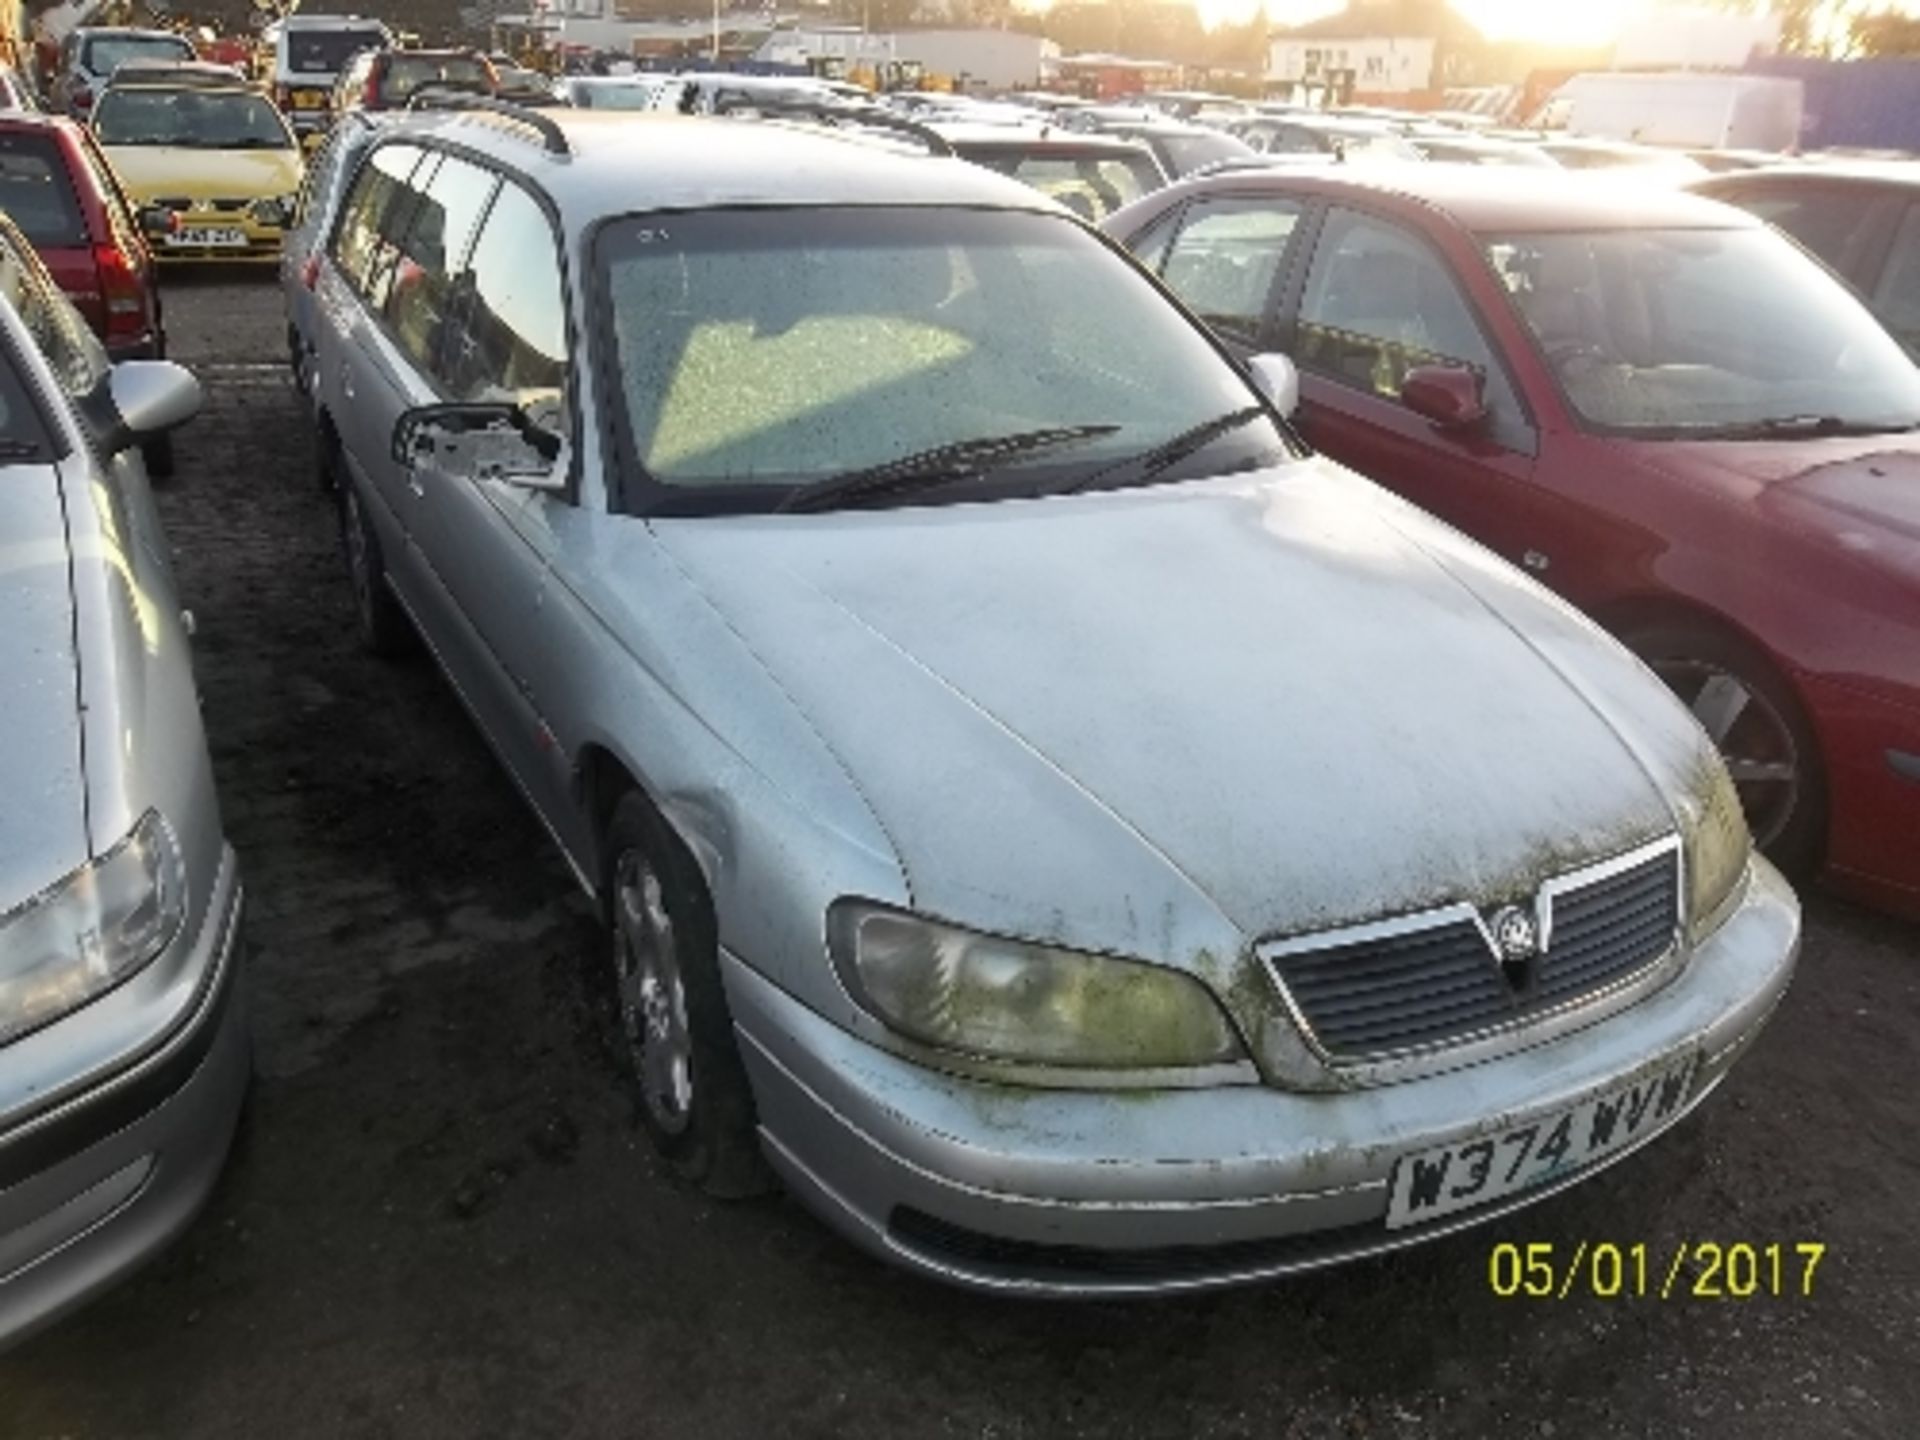 Vauxhall Omega GLS Estate - W374 WVW Date of registration: 19.07.2000 1998cc, petrol, manual, silver - Image 2 of 4